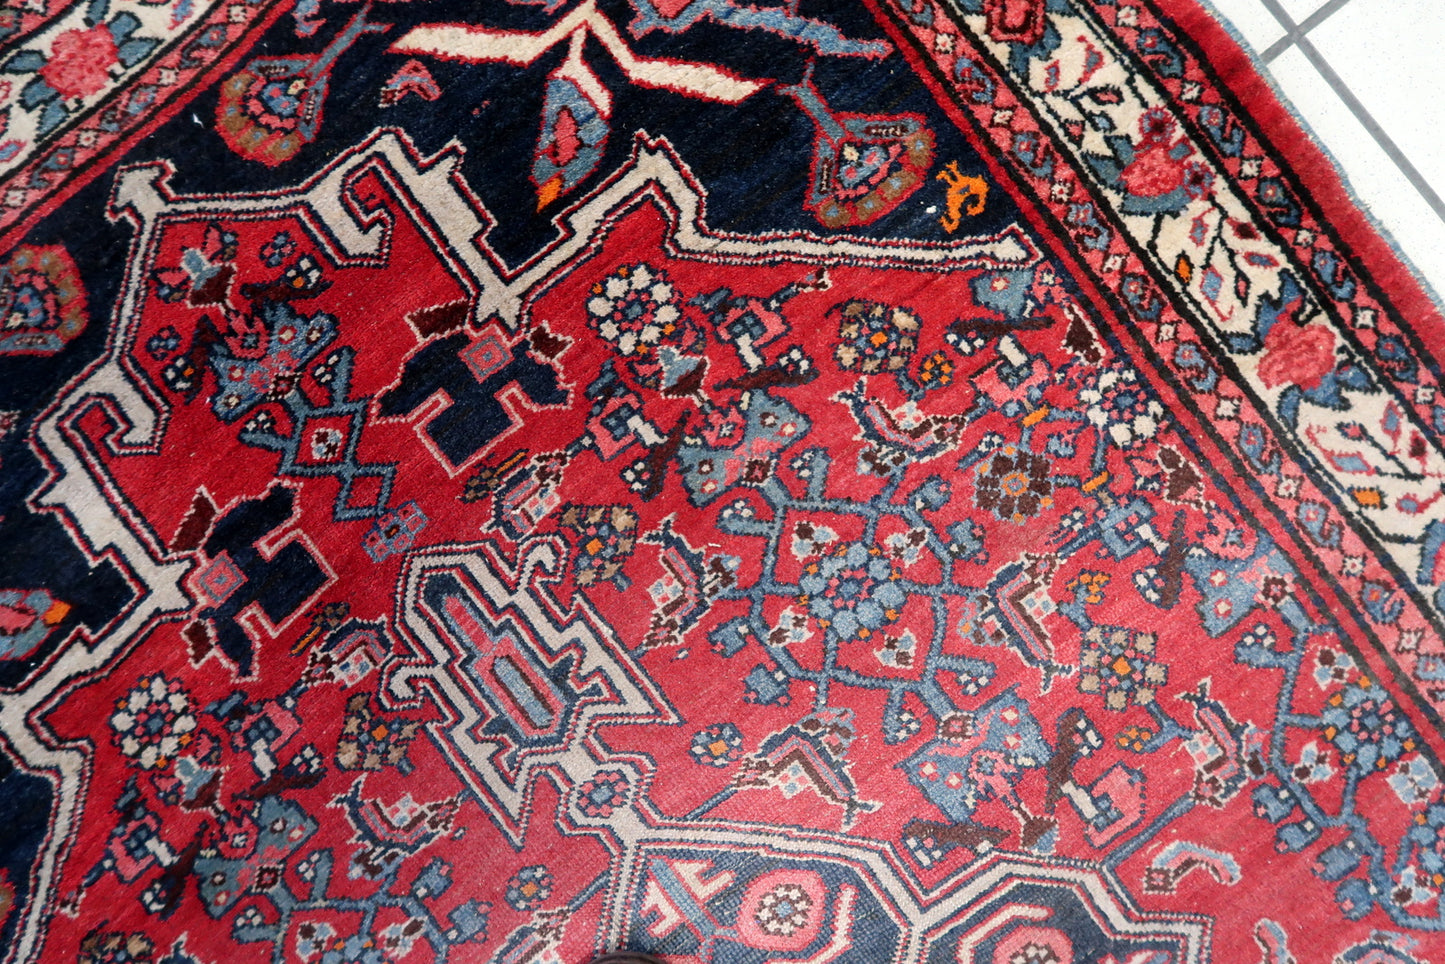 Close-up of wool material on Handmade Vintage Persian Bidjar Rug - Detailed view showcasing the wool material known for its resilience and softness.